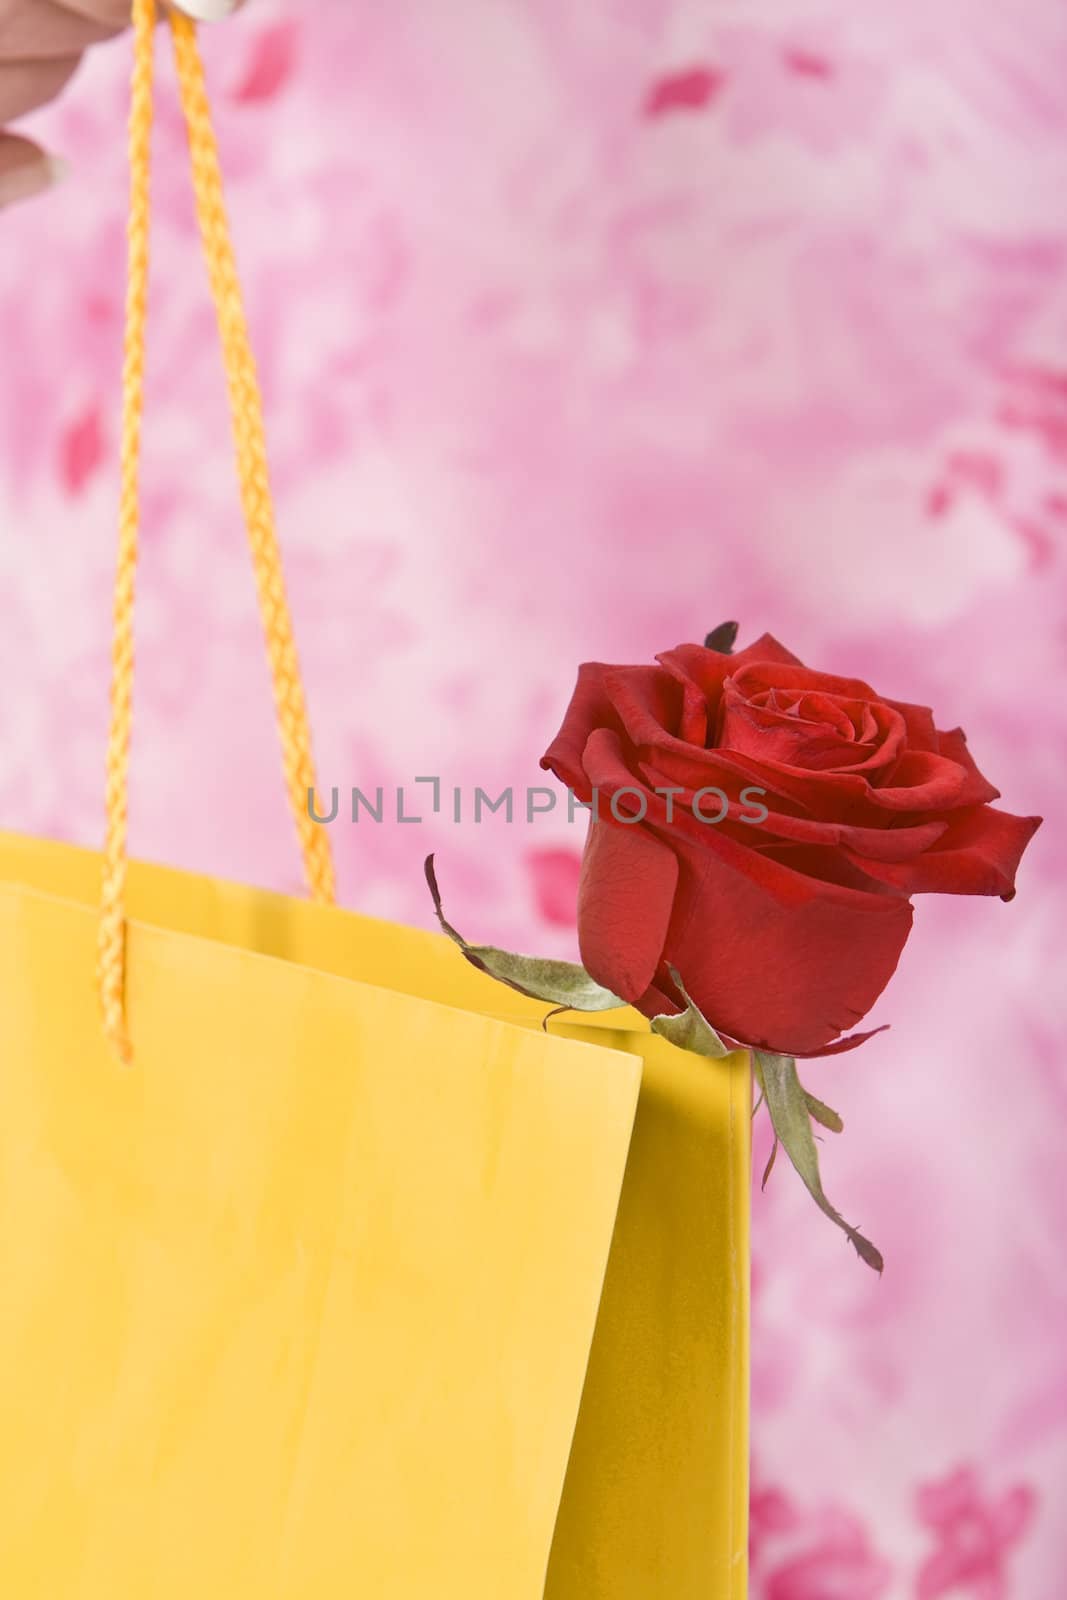 Close-up image of a rose sticking out of a yellow shopping bag. The background is made of the pink dress of the woman.Shot with Canon 70-200mm f/2.8L IS USM